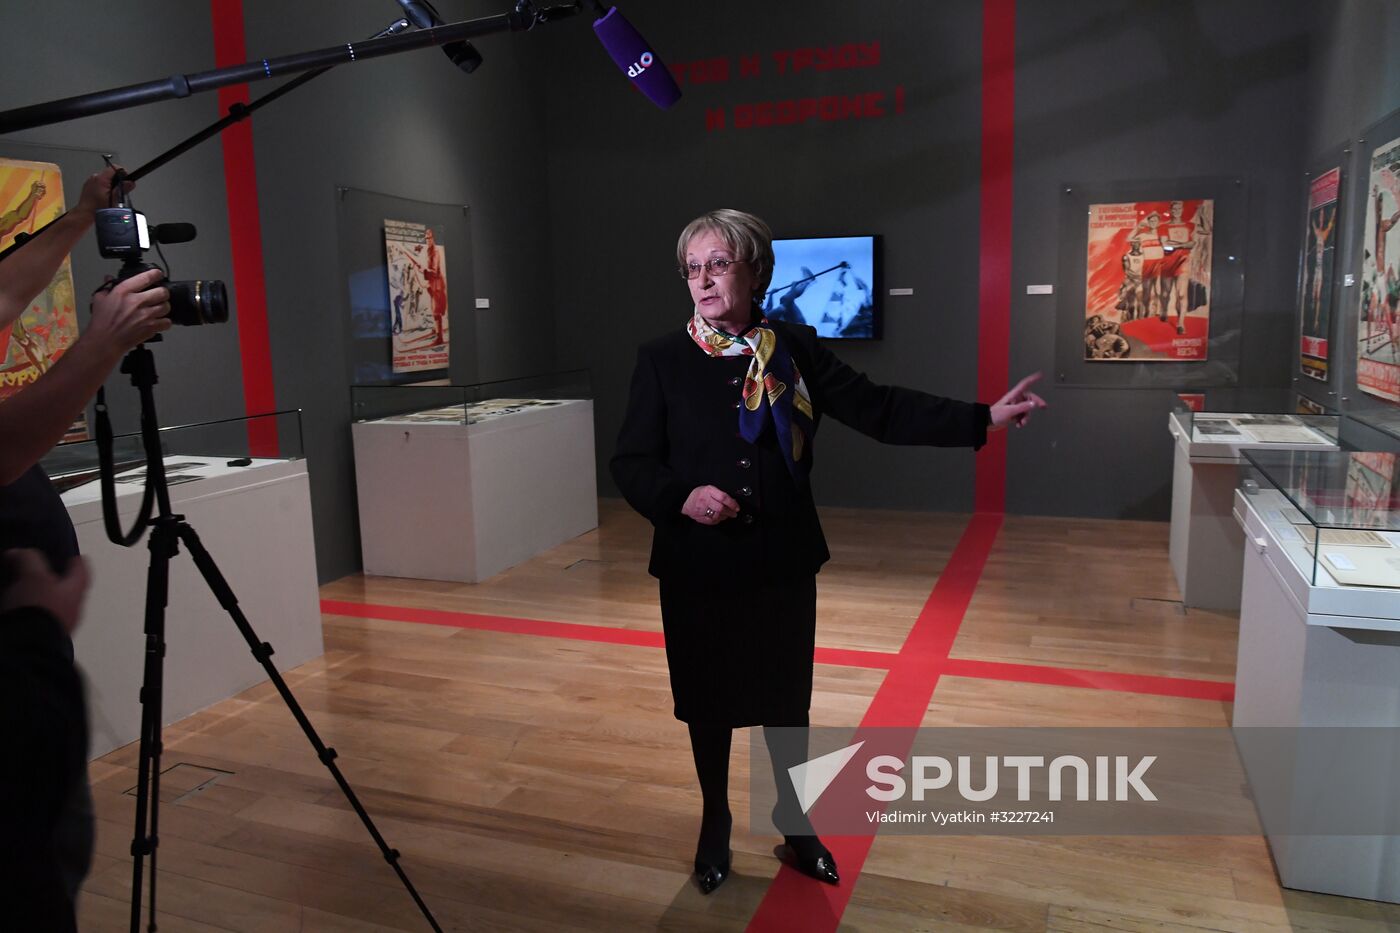 Exhibition "The energy of the dream. Towards 100th anniversary of the Great Russian Revolution"